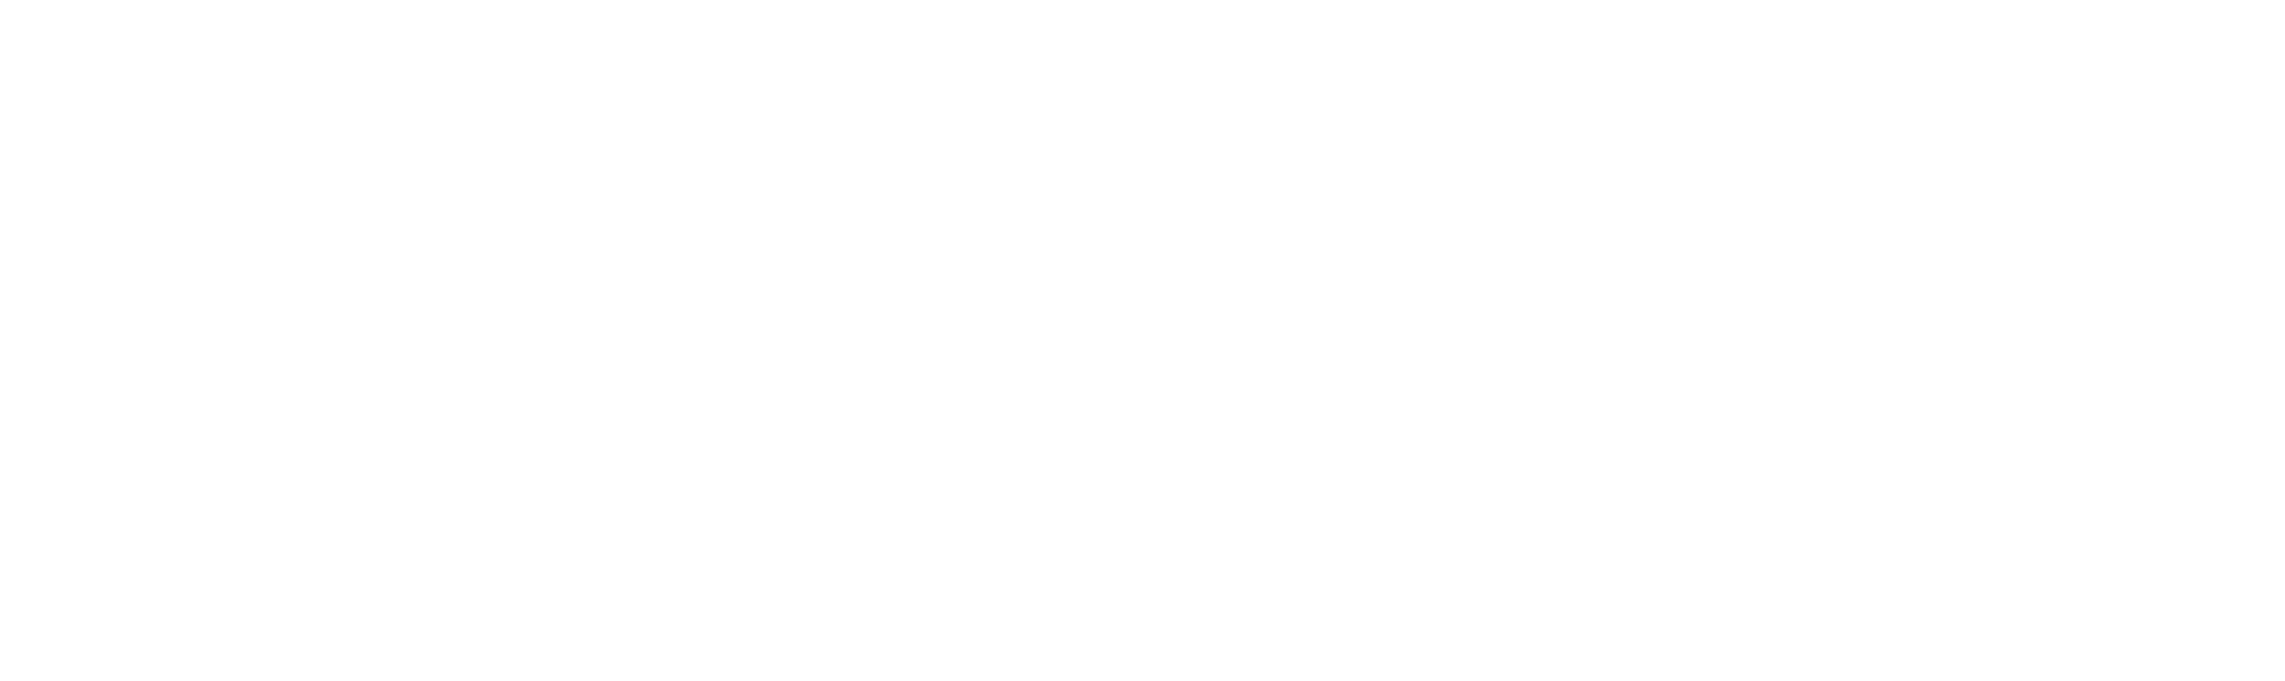 National Offshore Wind Institute